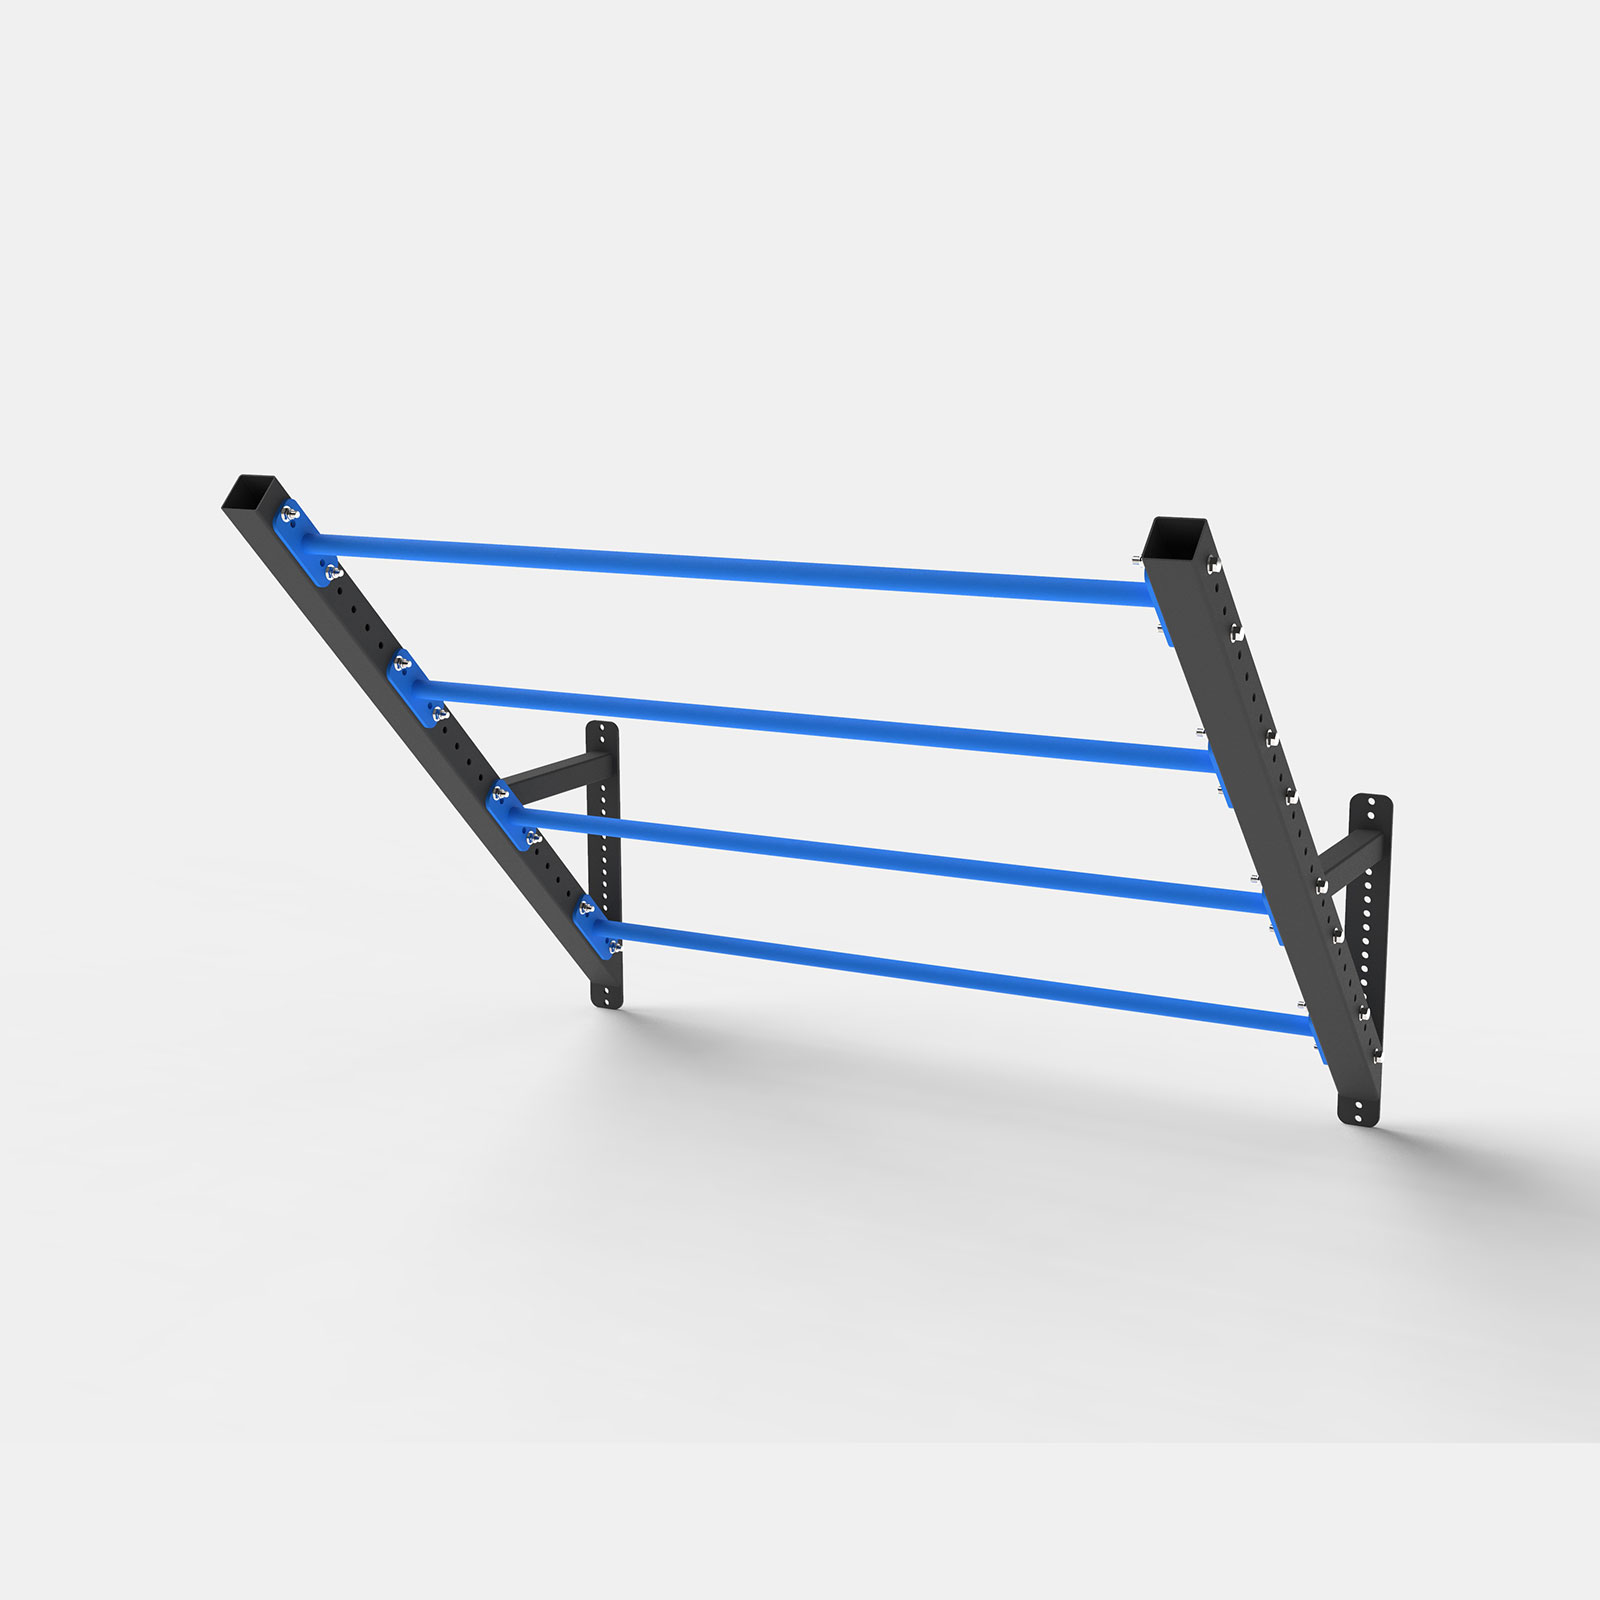 Rig Mounted Fly Away Pull Up Bar image